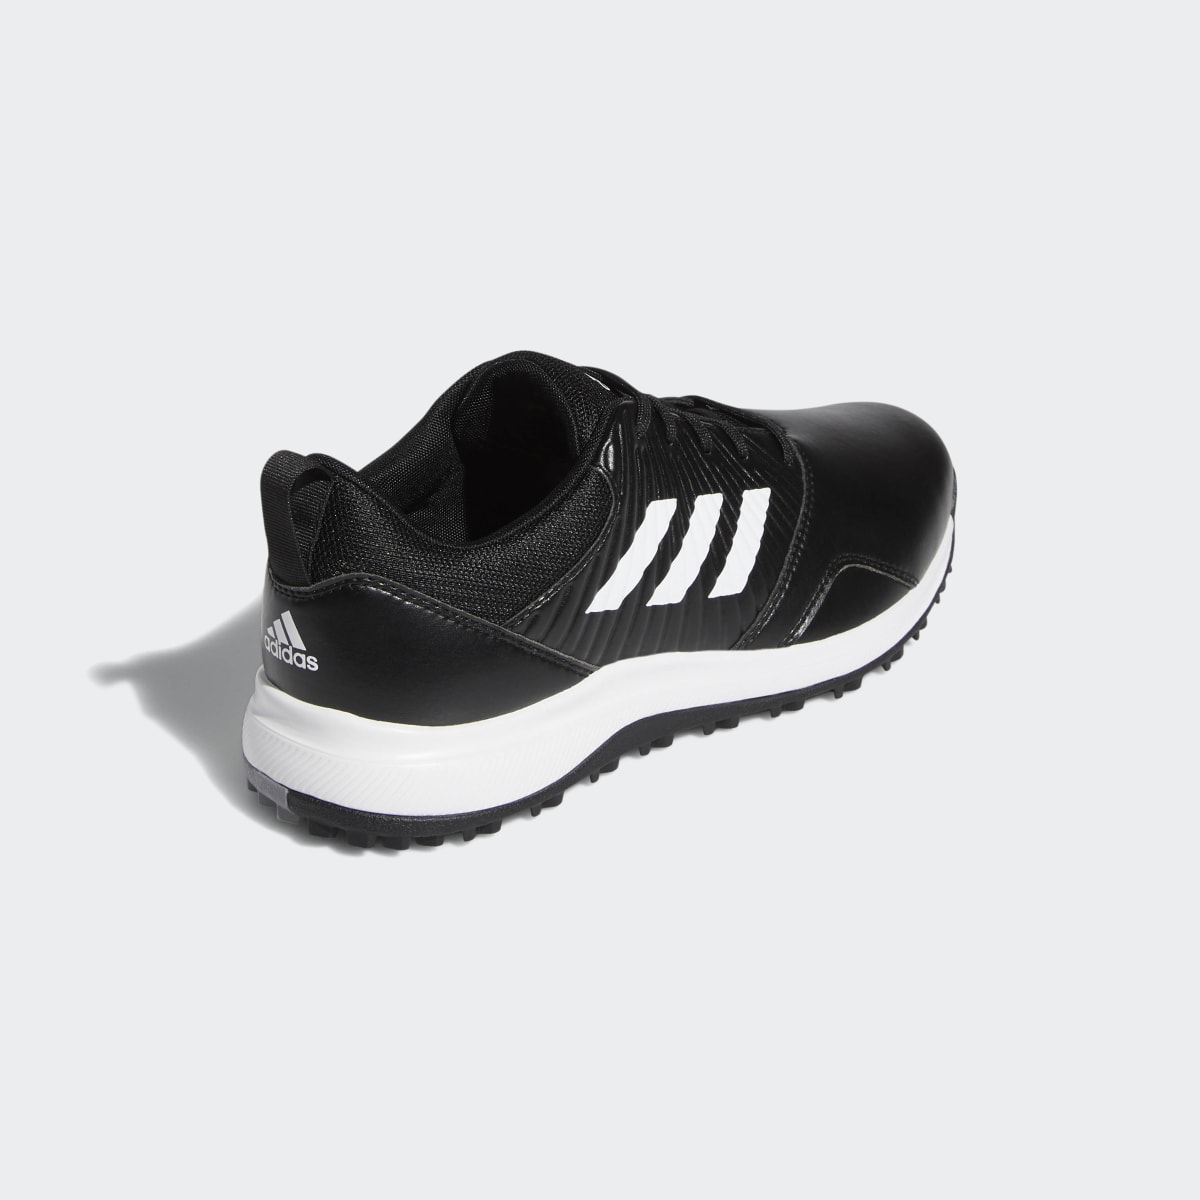 Adidas CP Traxion Spikeless Shoes. 6